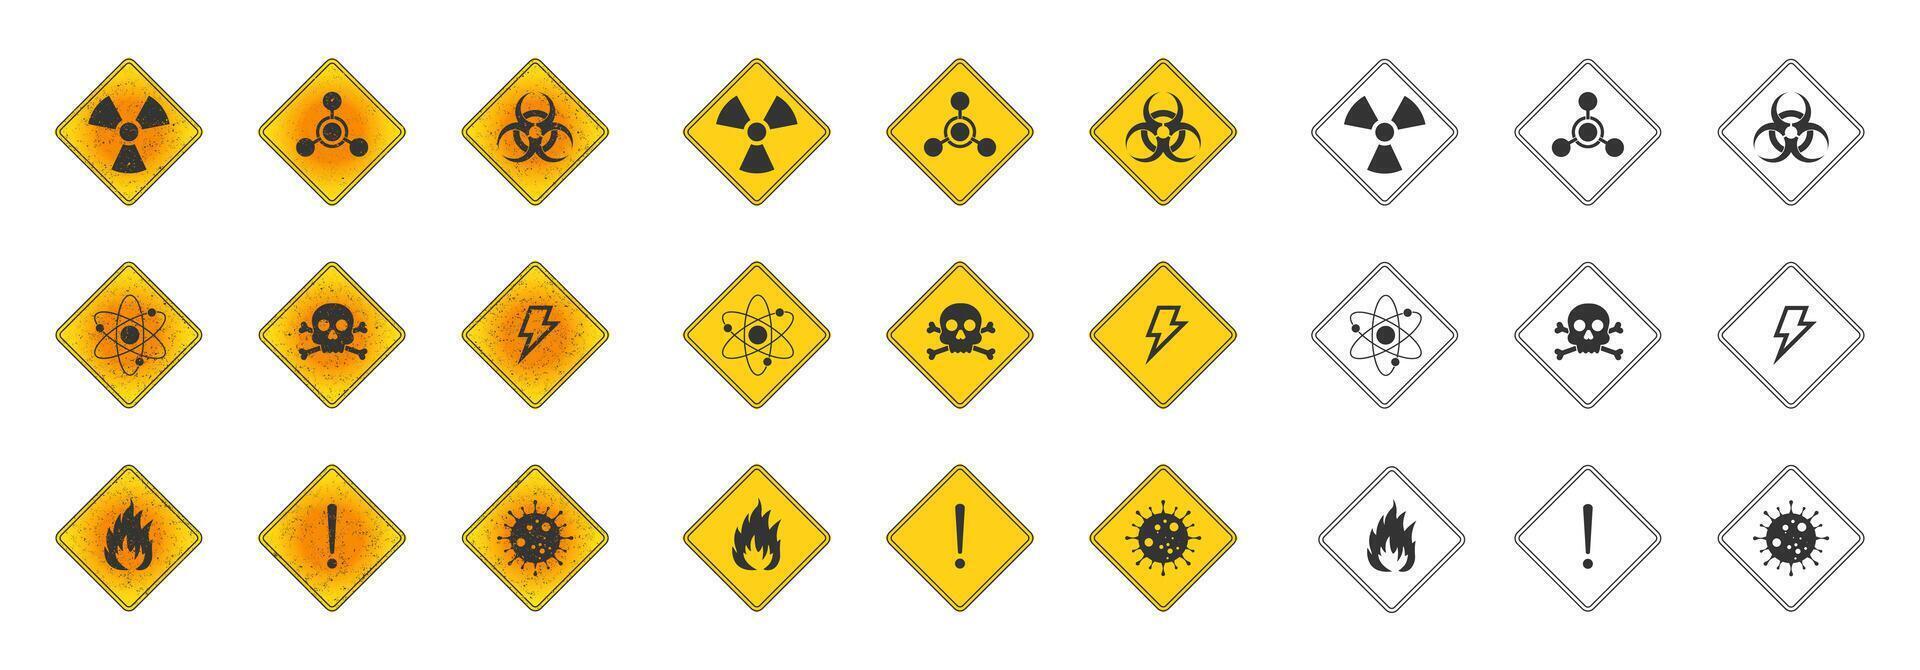 Set of Warning Hazard Signs. Includes black and white, yellow, and grunge texture. Vector illustration.